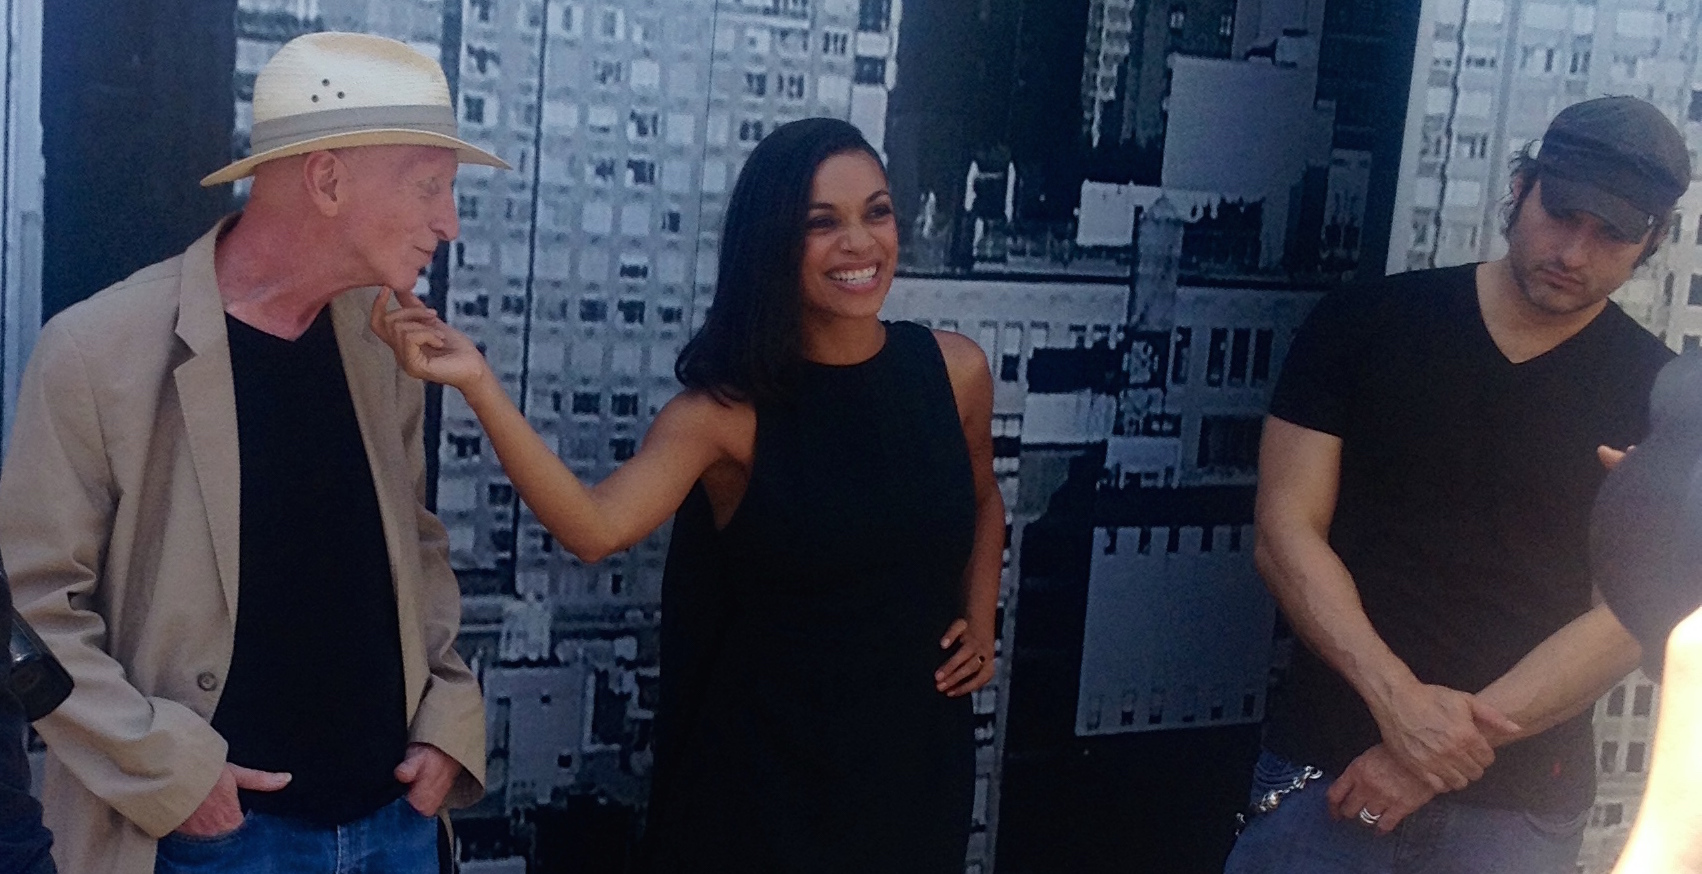 Frank Miller, Rosario Dawson, Robert Rodriquez at Sin City - A Dame To Kill For booth at Comic Con 2014 San Diego